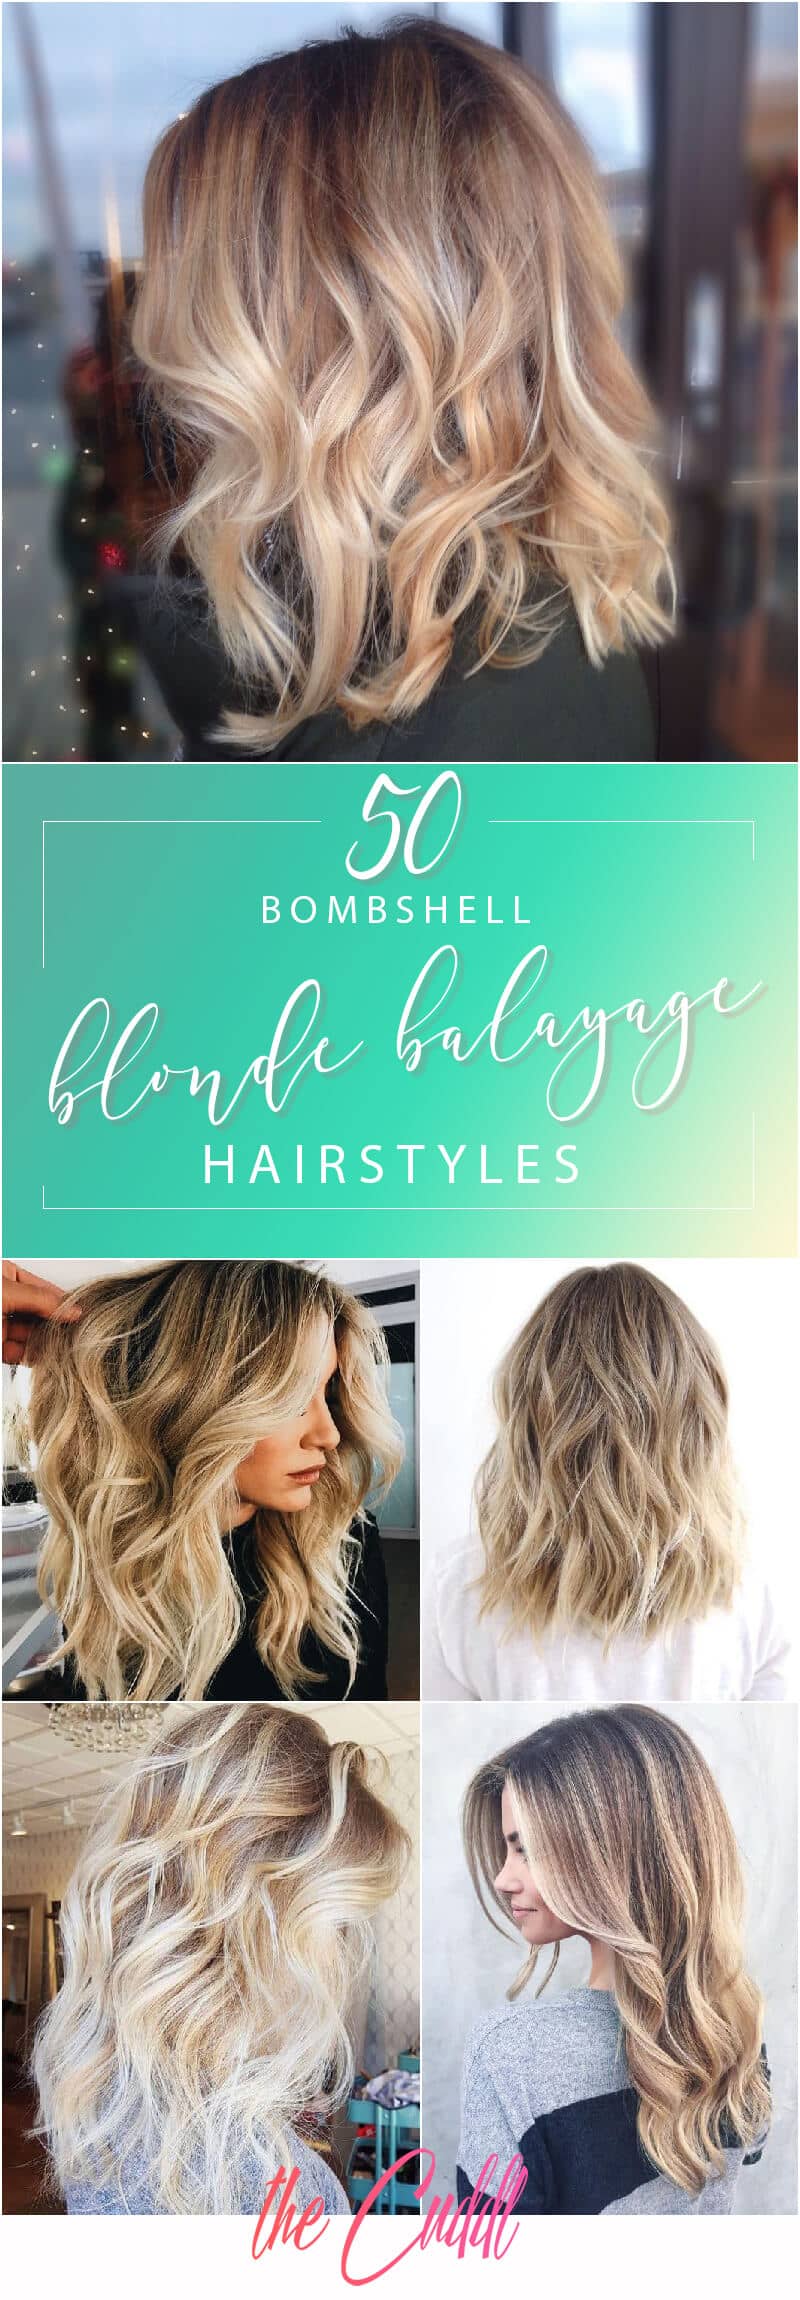 50 Bombshell Blonde Balayage Hairstyles that are Cute Easy Hairstyles for 2018 Hair Ideas